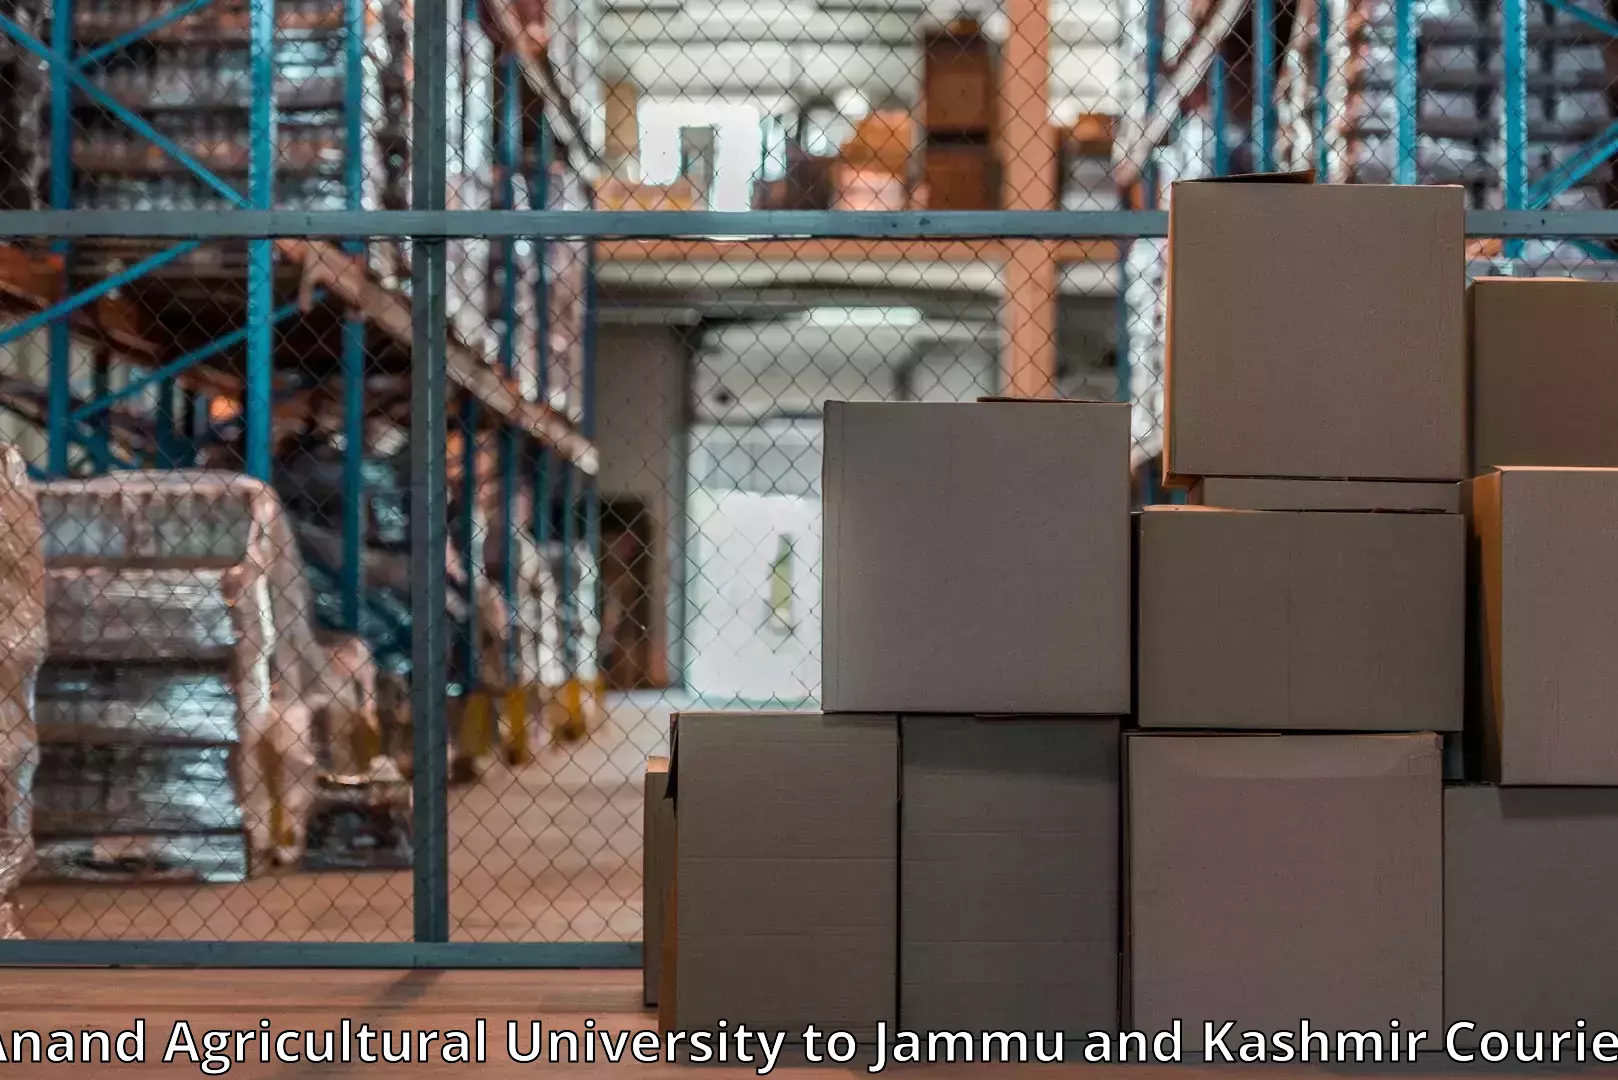 Quality moving services in Anand Agricultural University to Srinagar Kashmir